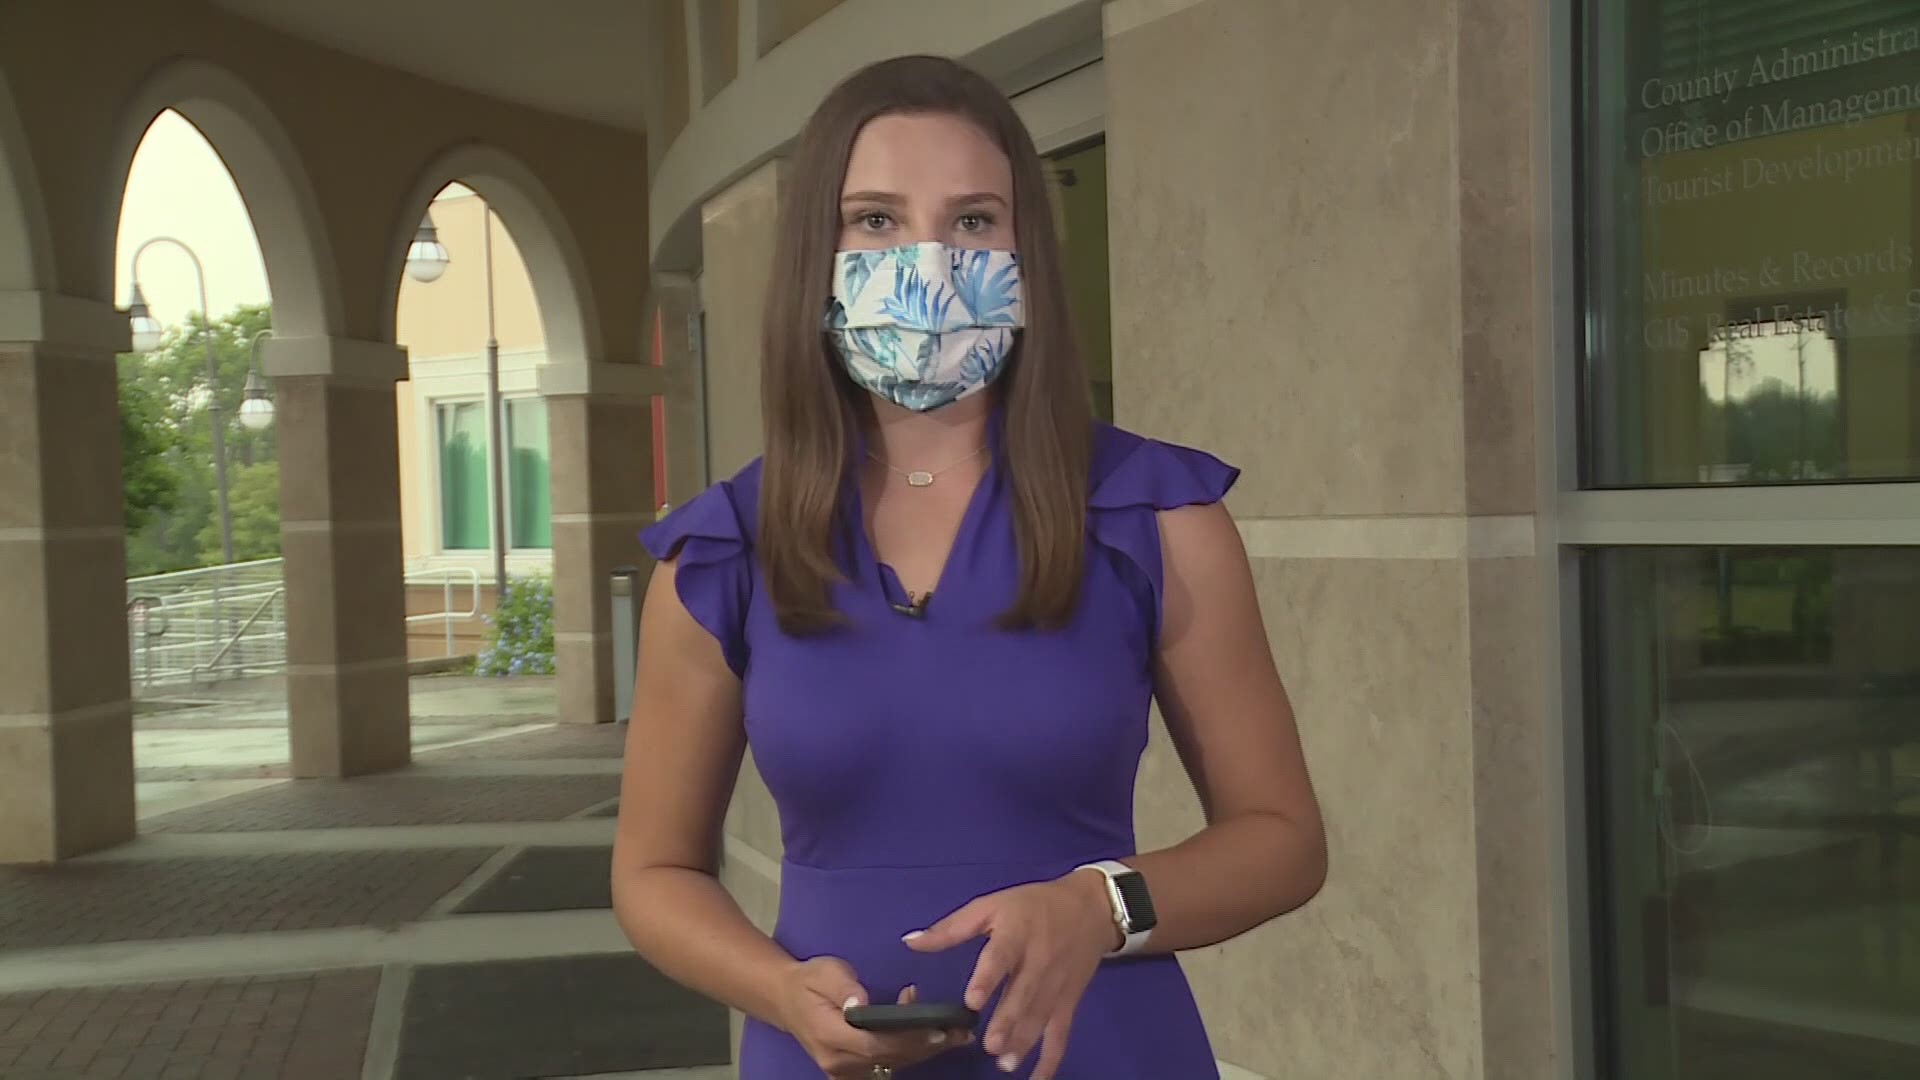 St. Johns County Commissioners have yet to discuss possibility of mask mandate